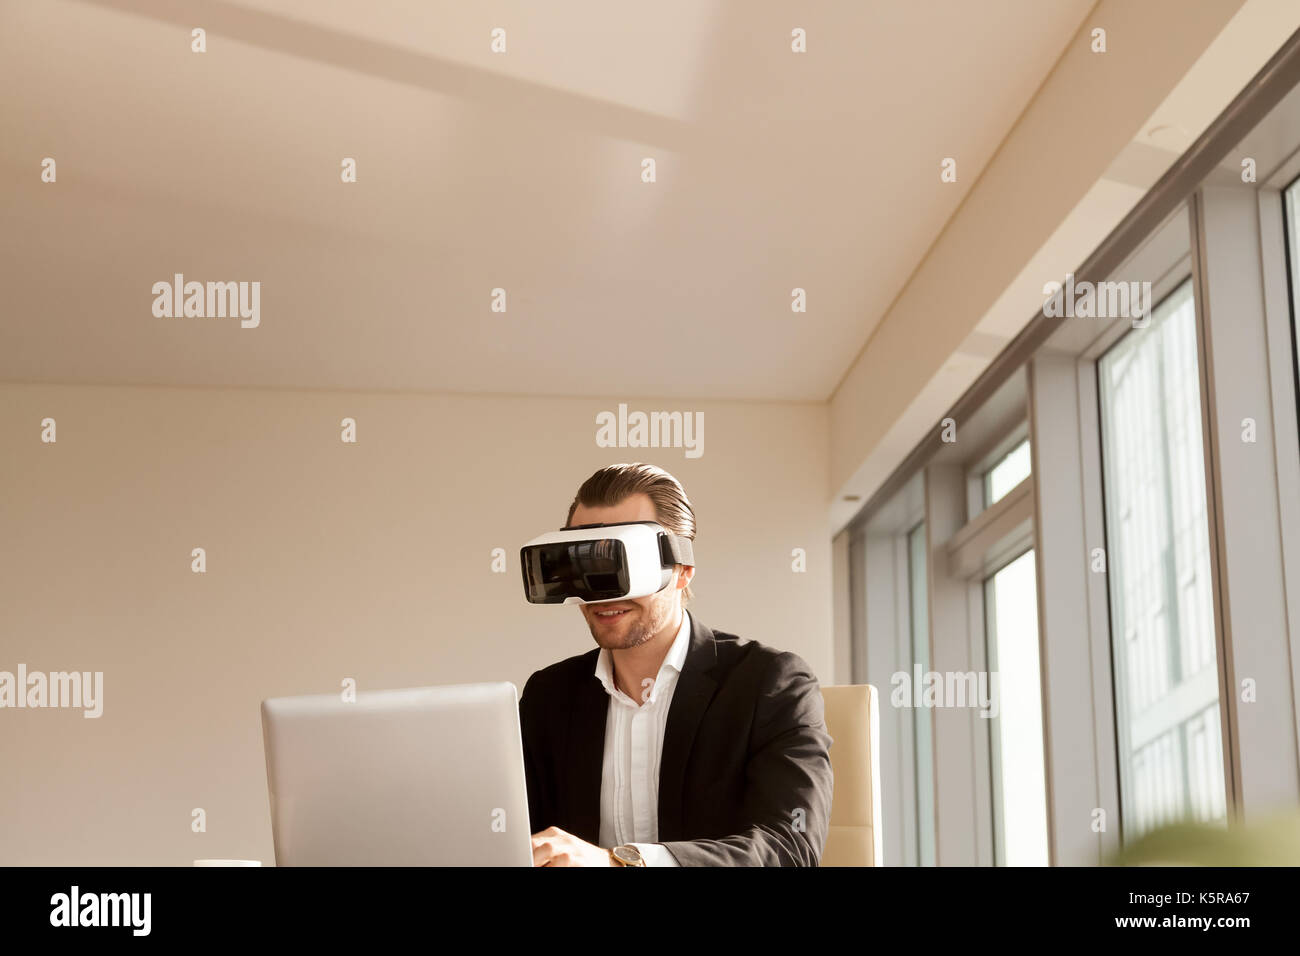 Smiling businessman in vr headset testing application on laptop. Stock Photo